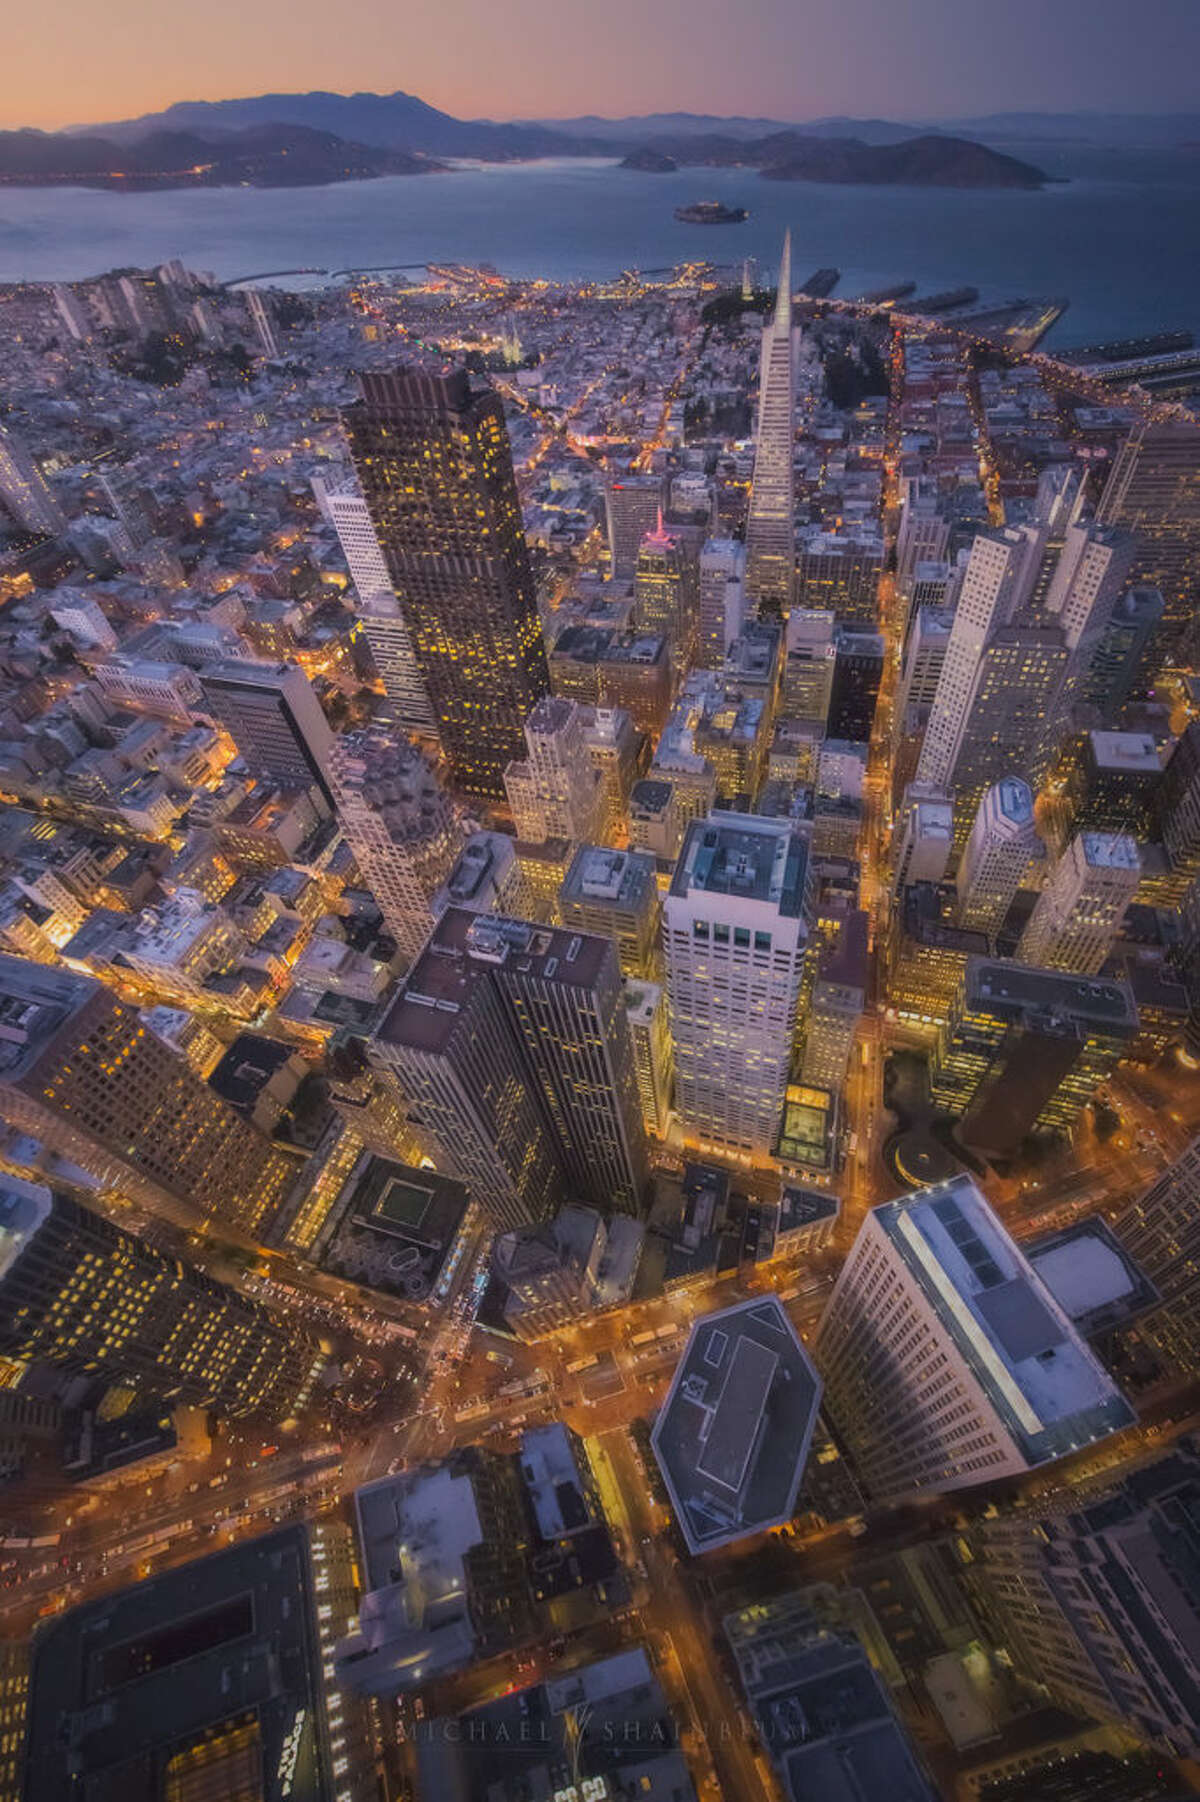 The illuminated streets of downtown San Francisco.